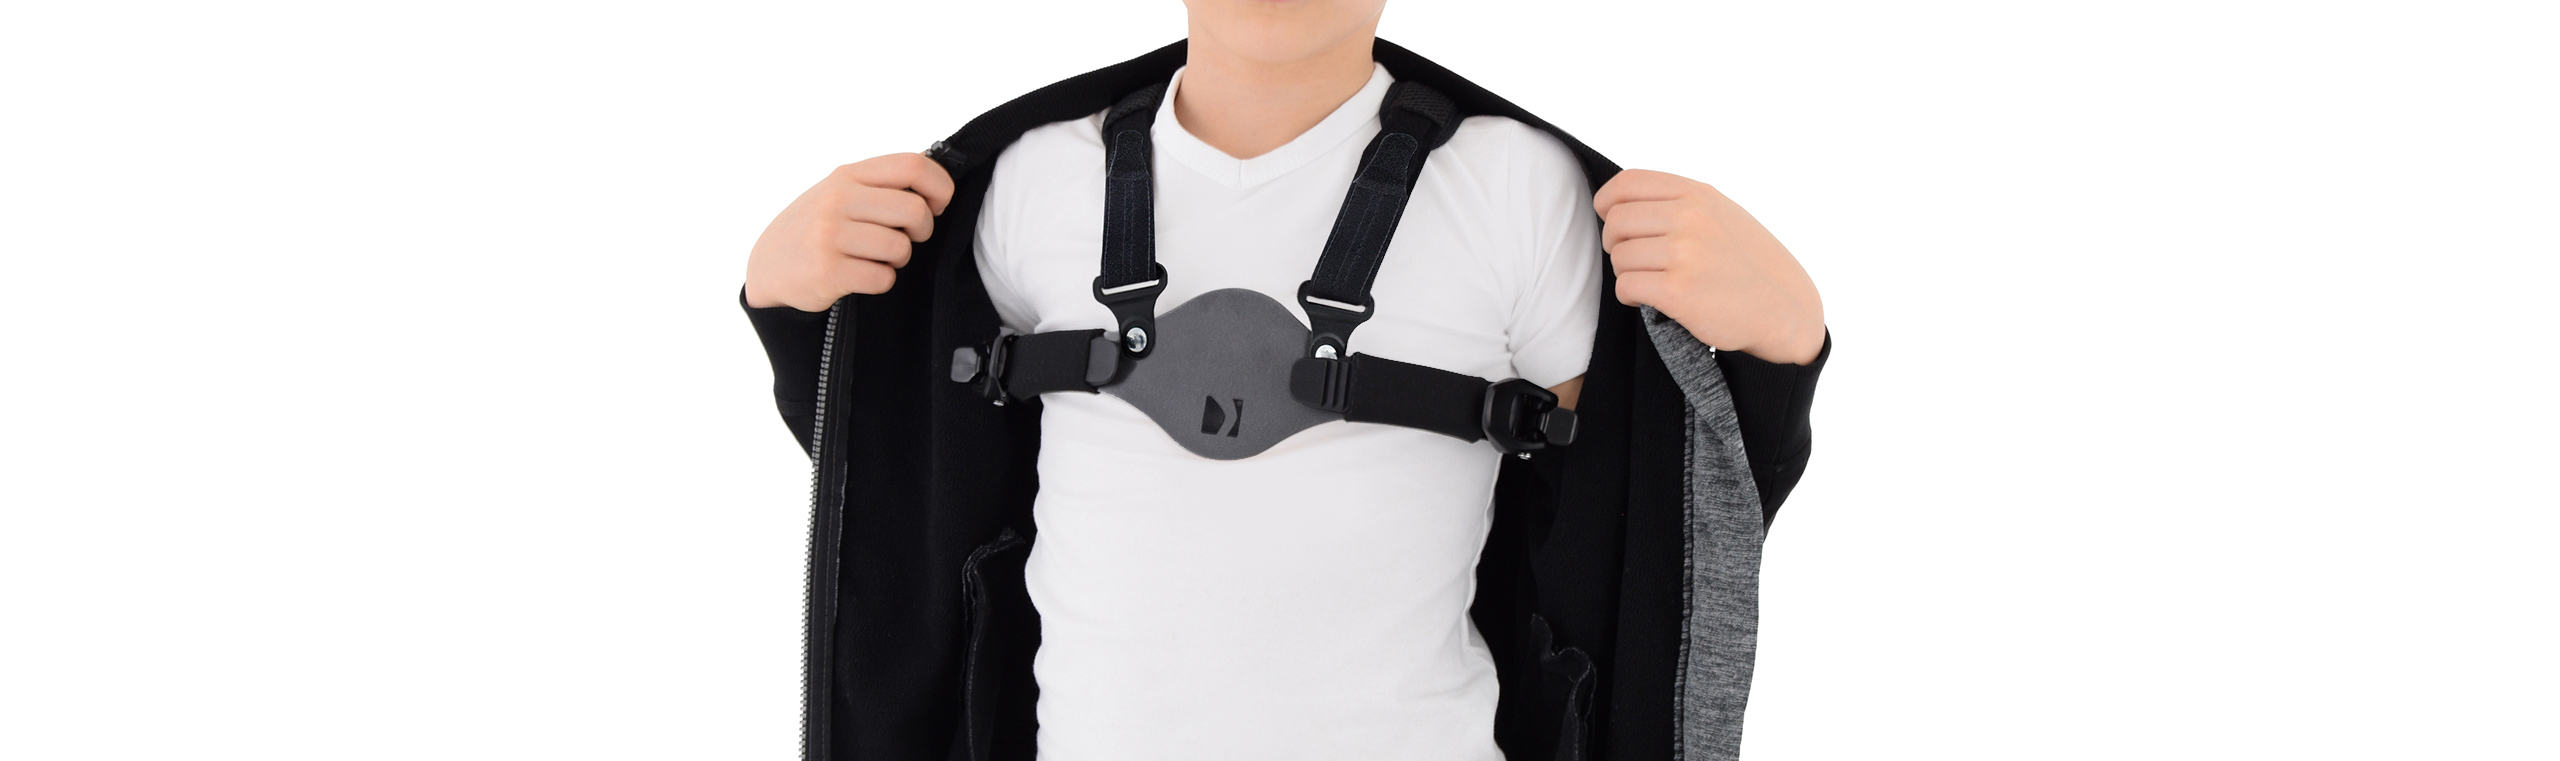 Custom Brace for Pectus Carinatum, also known as Pigeon Chest